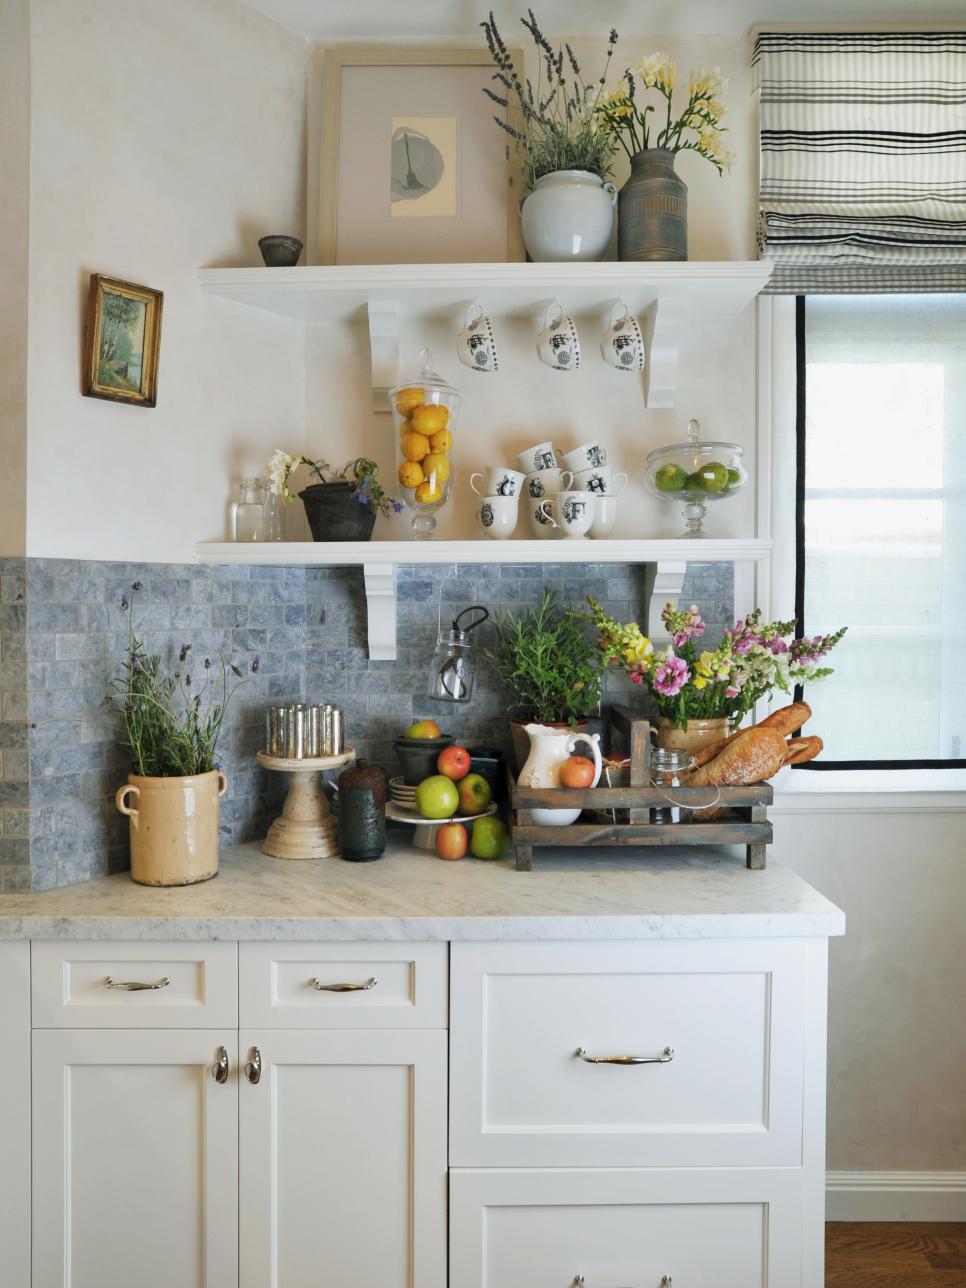 White Eclectic Kitchen With Blue Stone Backsplash and White Shelves